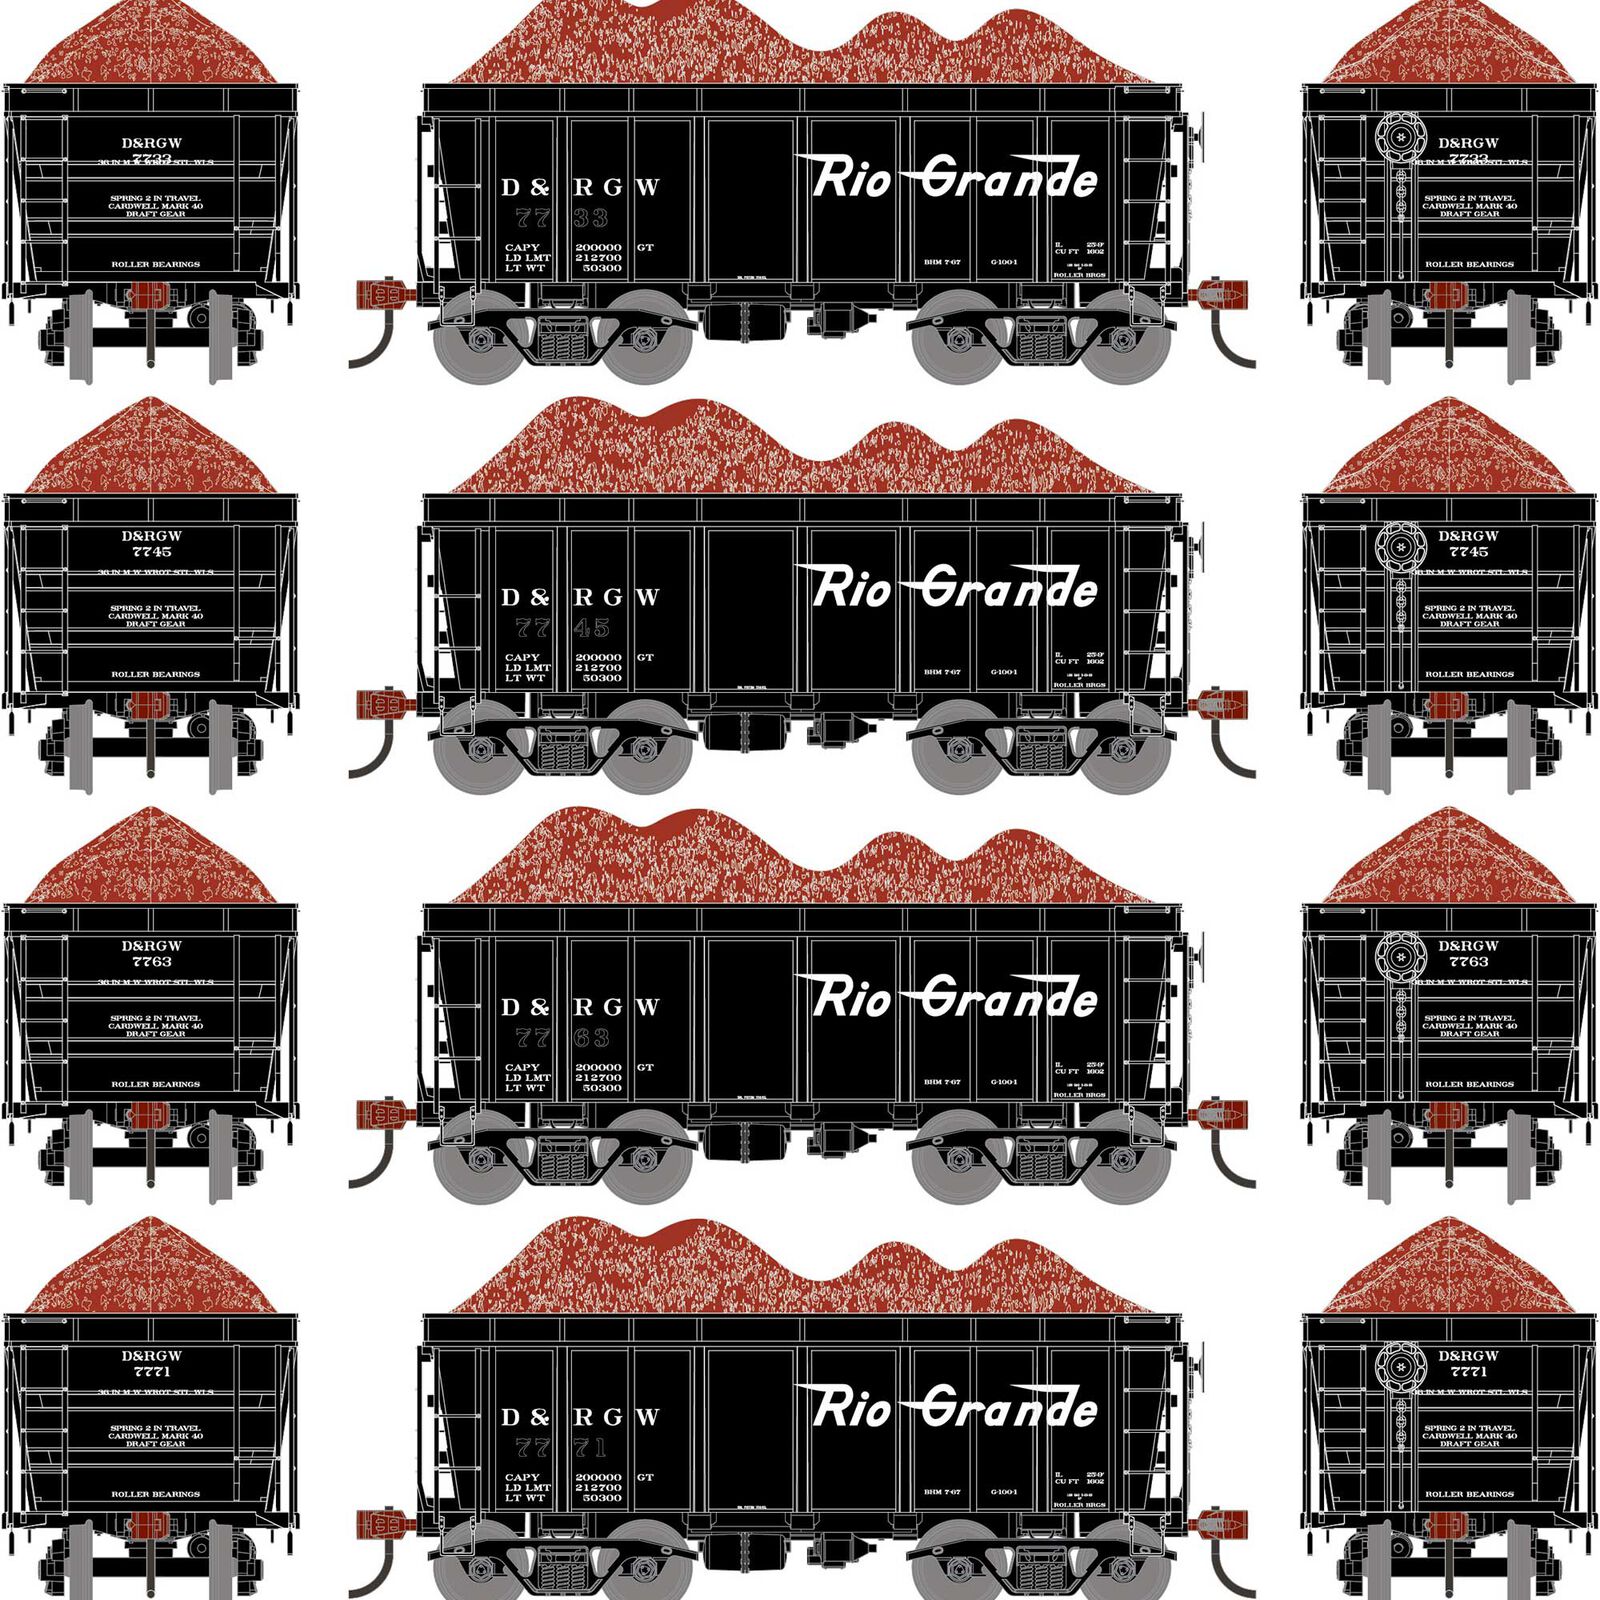 HO 26' PC&F Ore Car Tight-Bottom High Side with Load, DRGW Legendary Liveries #7733/7745/7763/7771 (4)